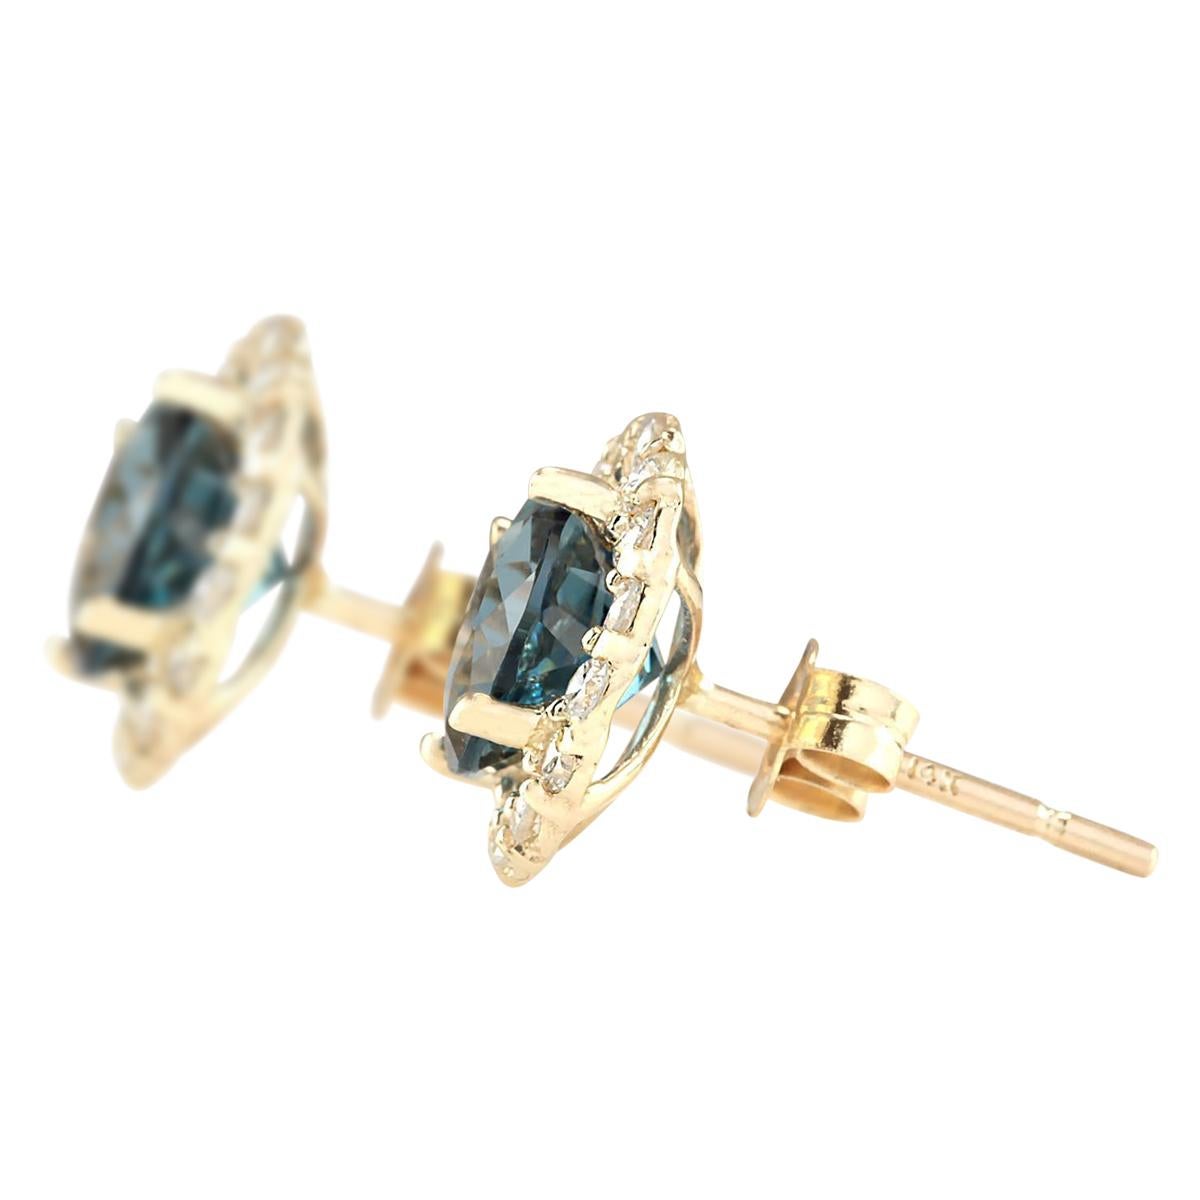 Stamped: 14K Yellow Gold
Total Earrings Weight: 2.0 Grams
Total Natural Topaz Weight is 3.00 Carat (Measures: 7.00x7.00 mm)
Color: London Blue
Total Natural Diamond Weight is 0.65 Carat
Color: F-G, Clarity: VS2-SI1
Face Measures: 10.60x10.60 mm
Sku: